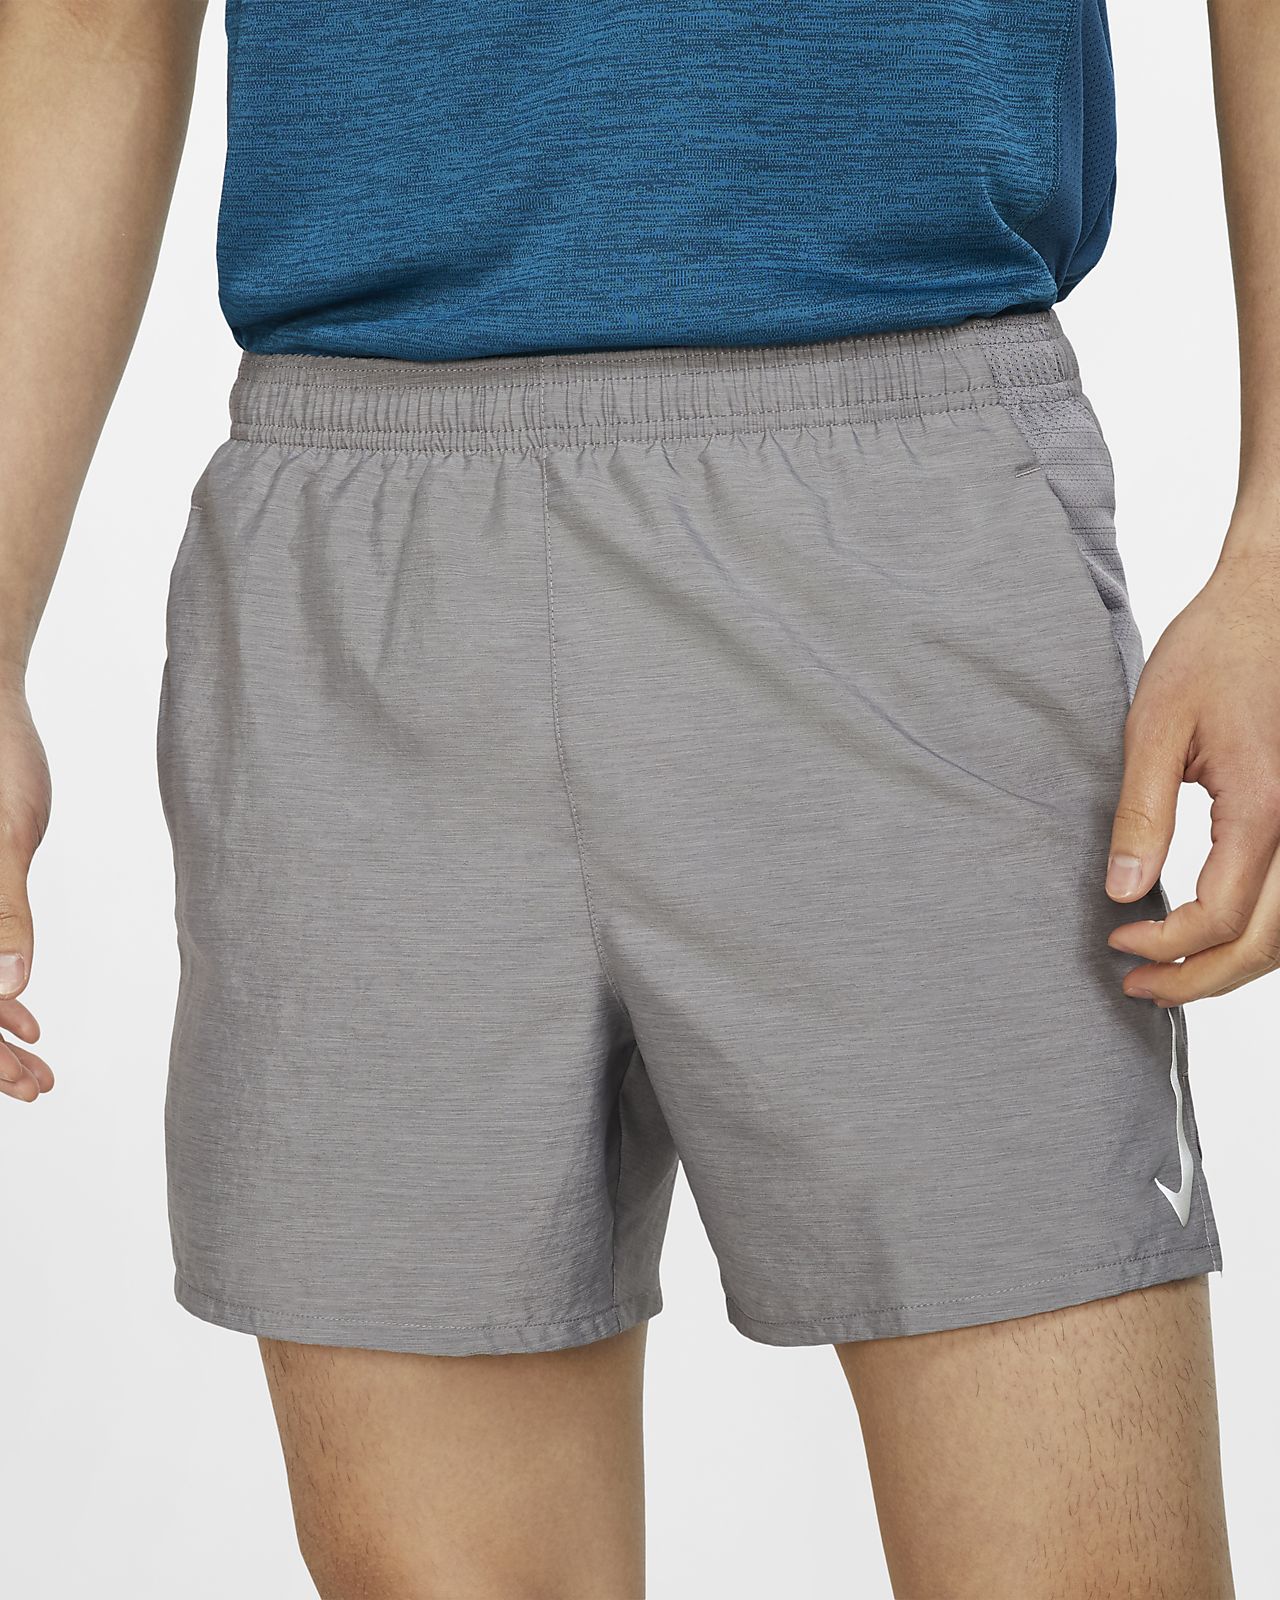 nike mens running shorts with compression liner